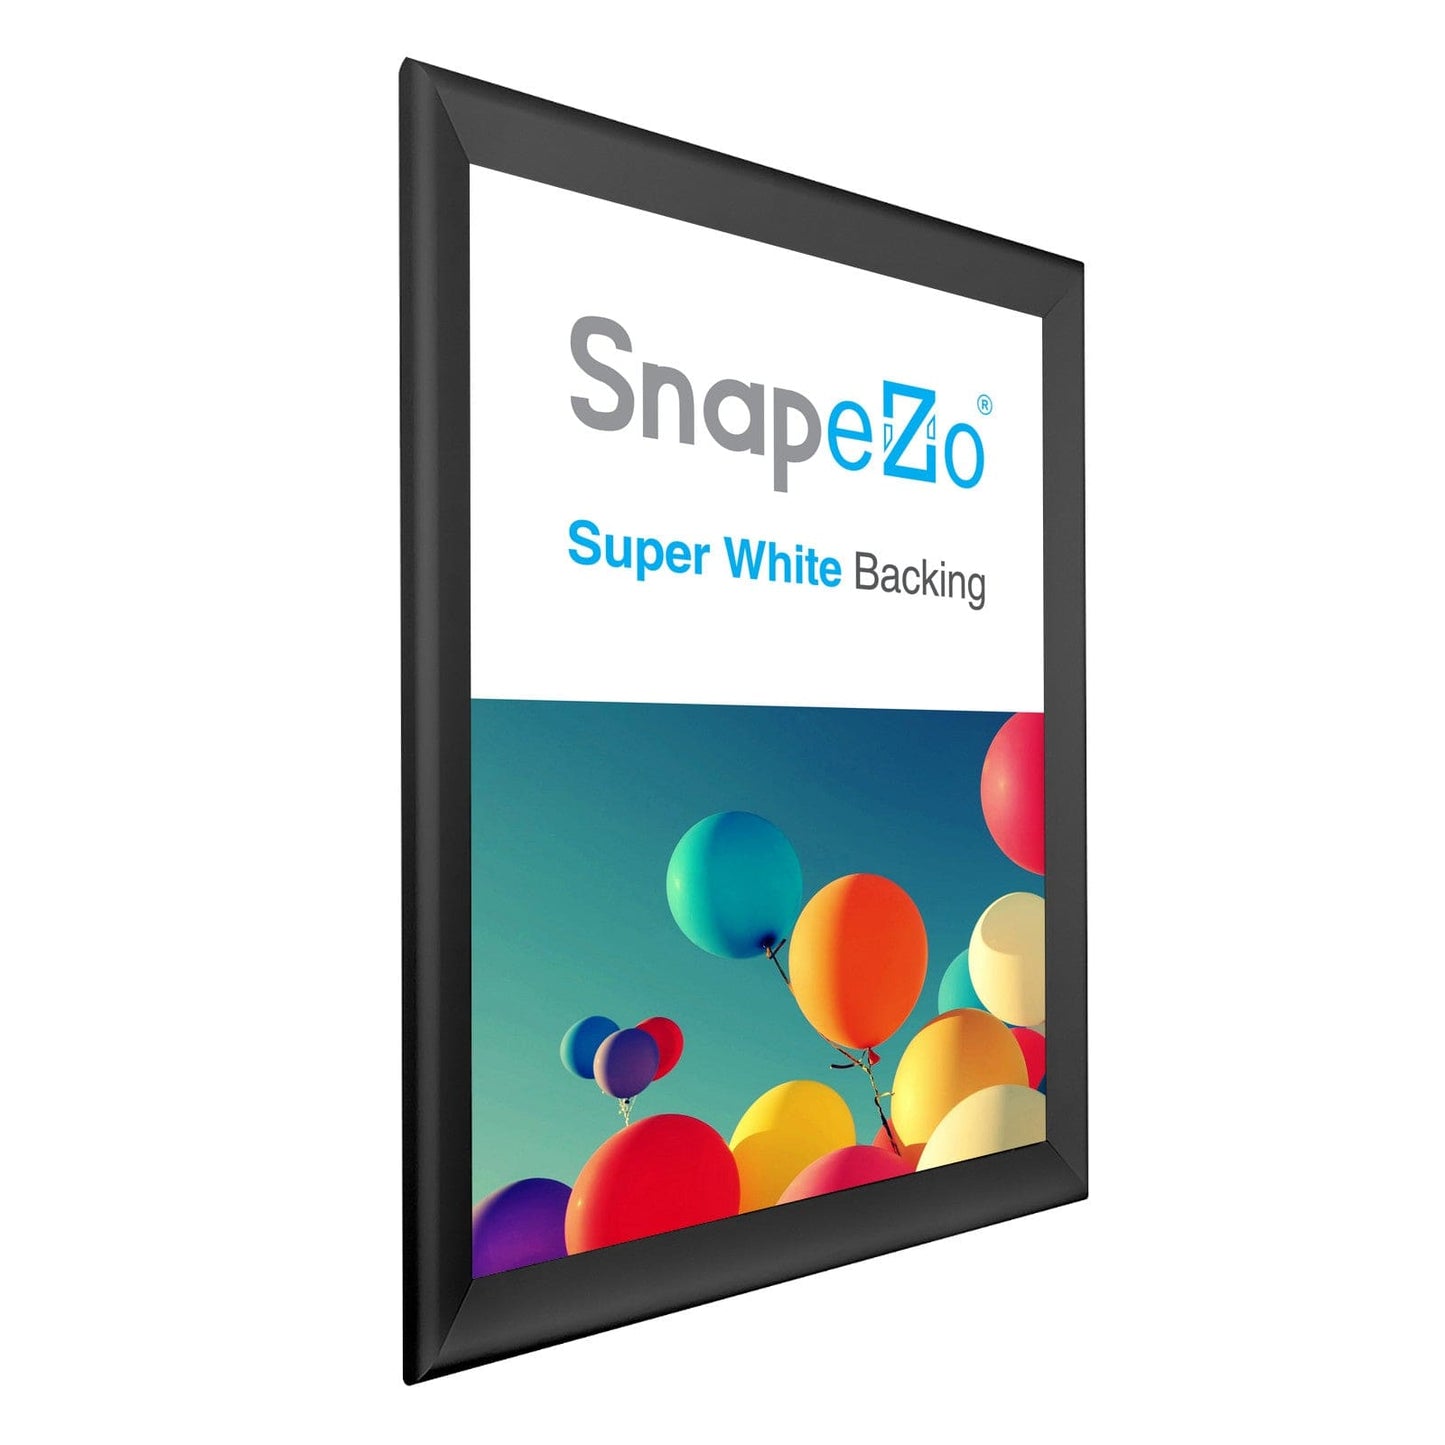 34x48 Inches Black SnapeZo® Snap Frame - 1.7" profile - Snap Frames Direct